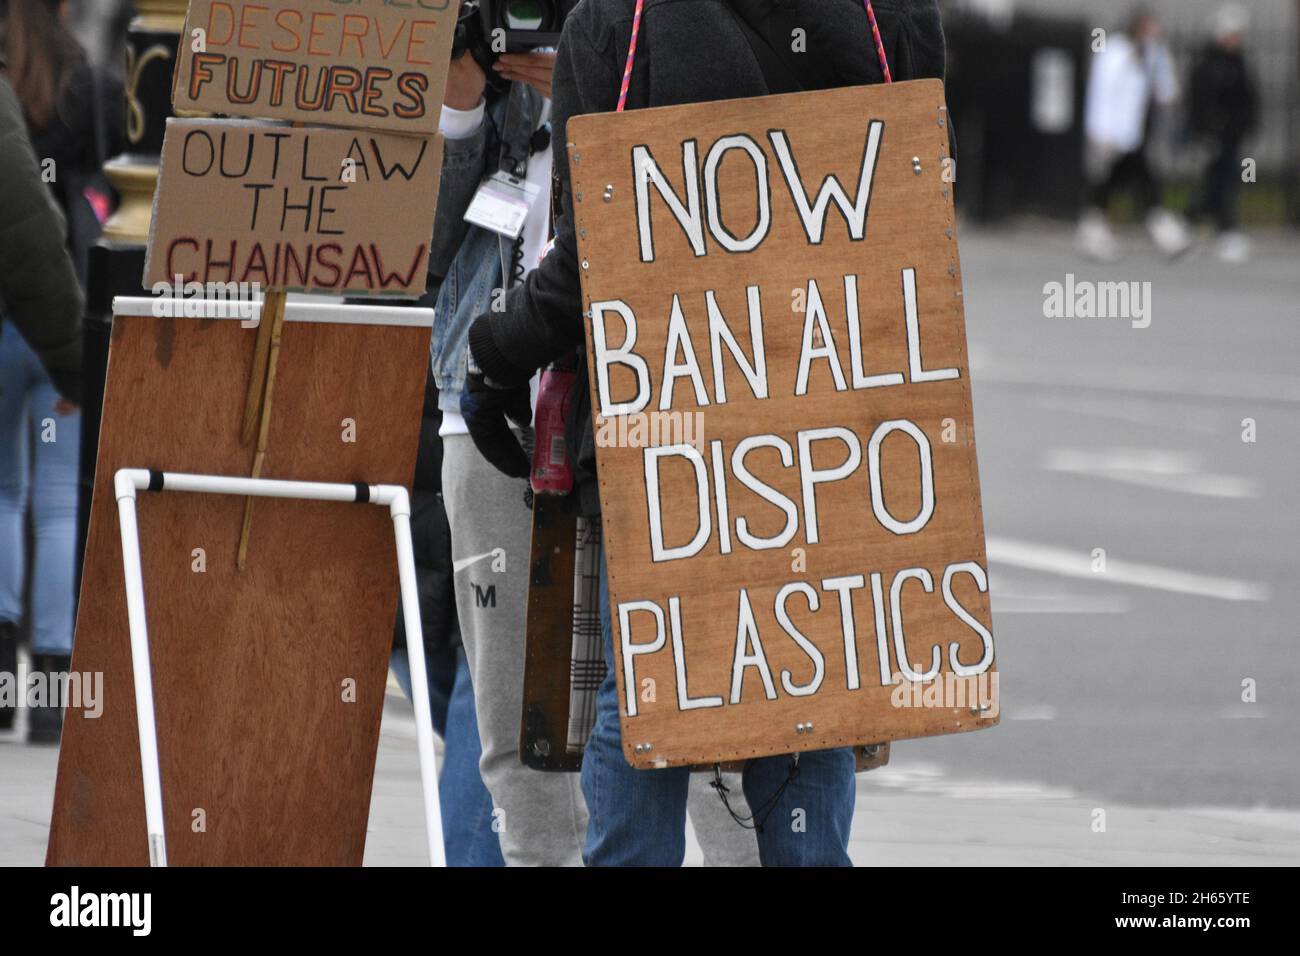 A protest sign held by a green eco activist outside the Houses of Parliament in Westminster London that reads “Now ban all disposable plastics” Stock Photo